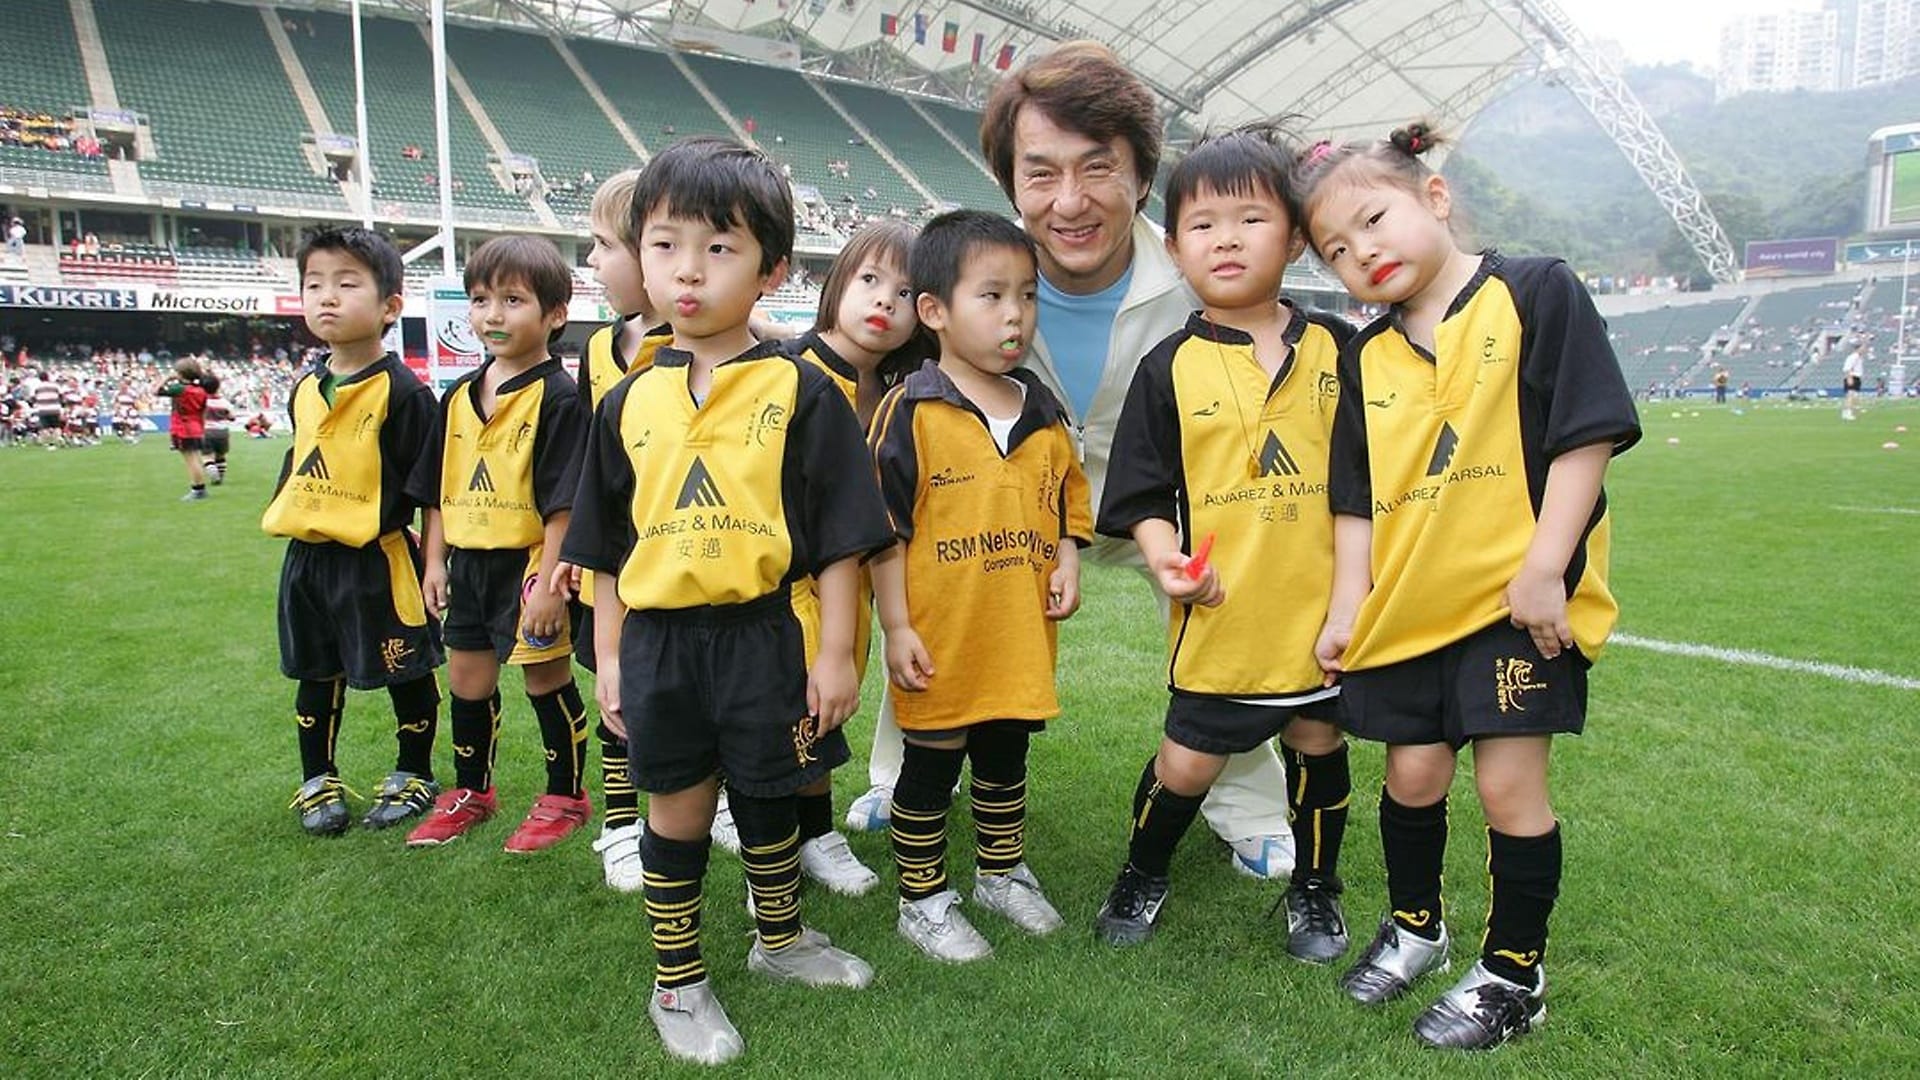 World-famous actor Jackie Chan as a Laureus Ambassador with rugby-crazy children at the Hong Kong Sevens.